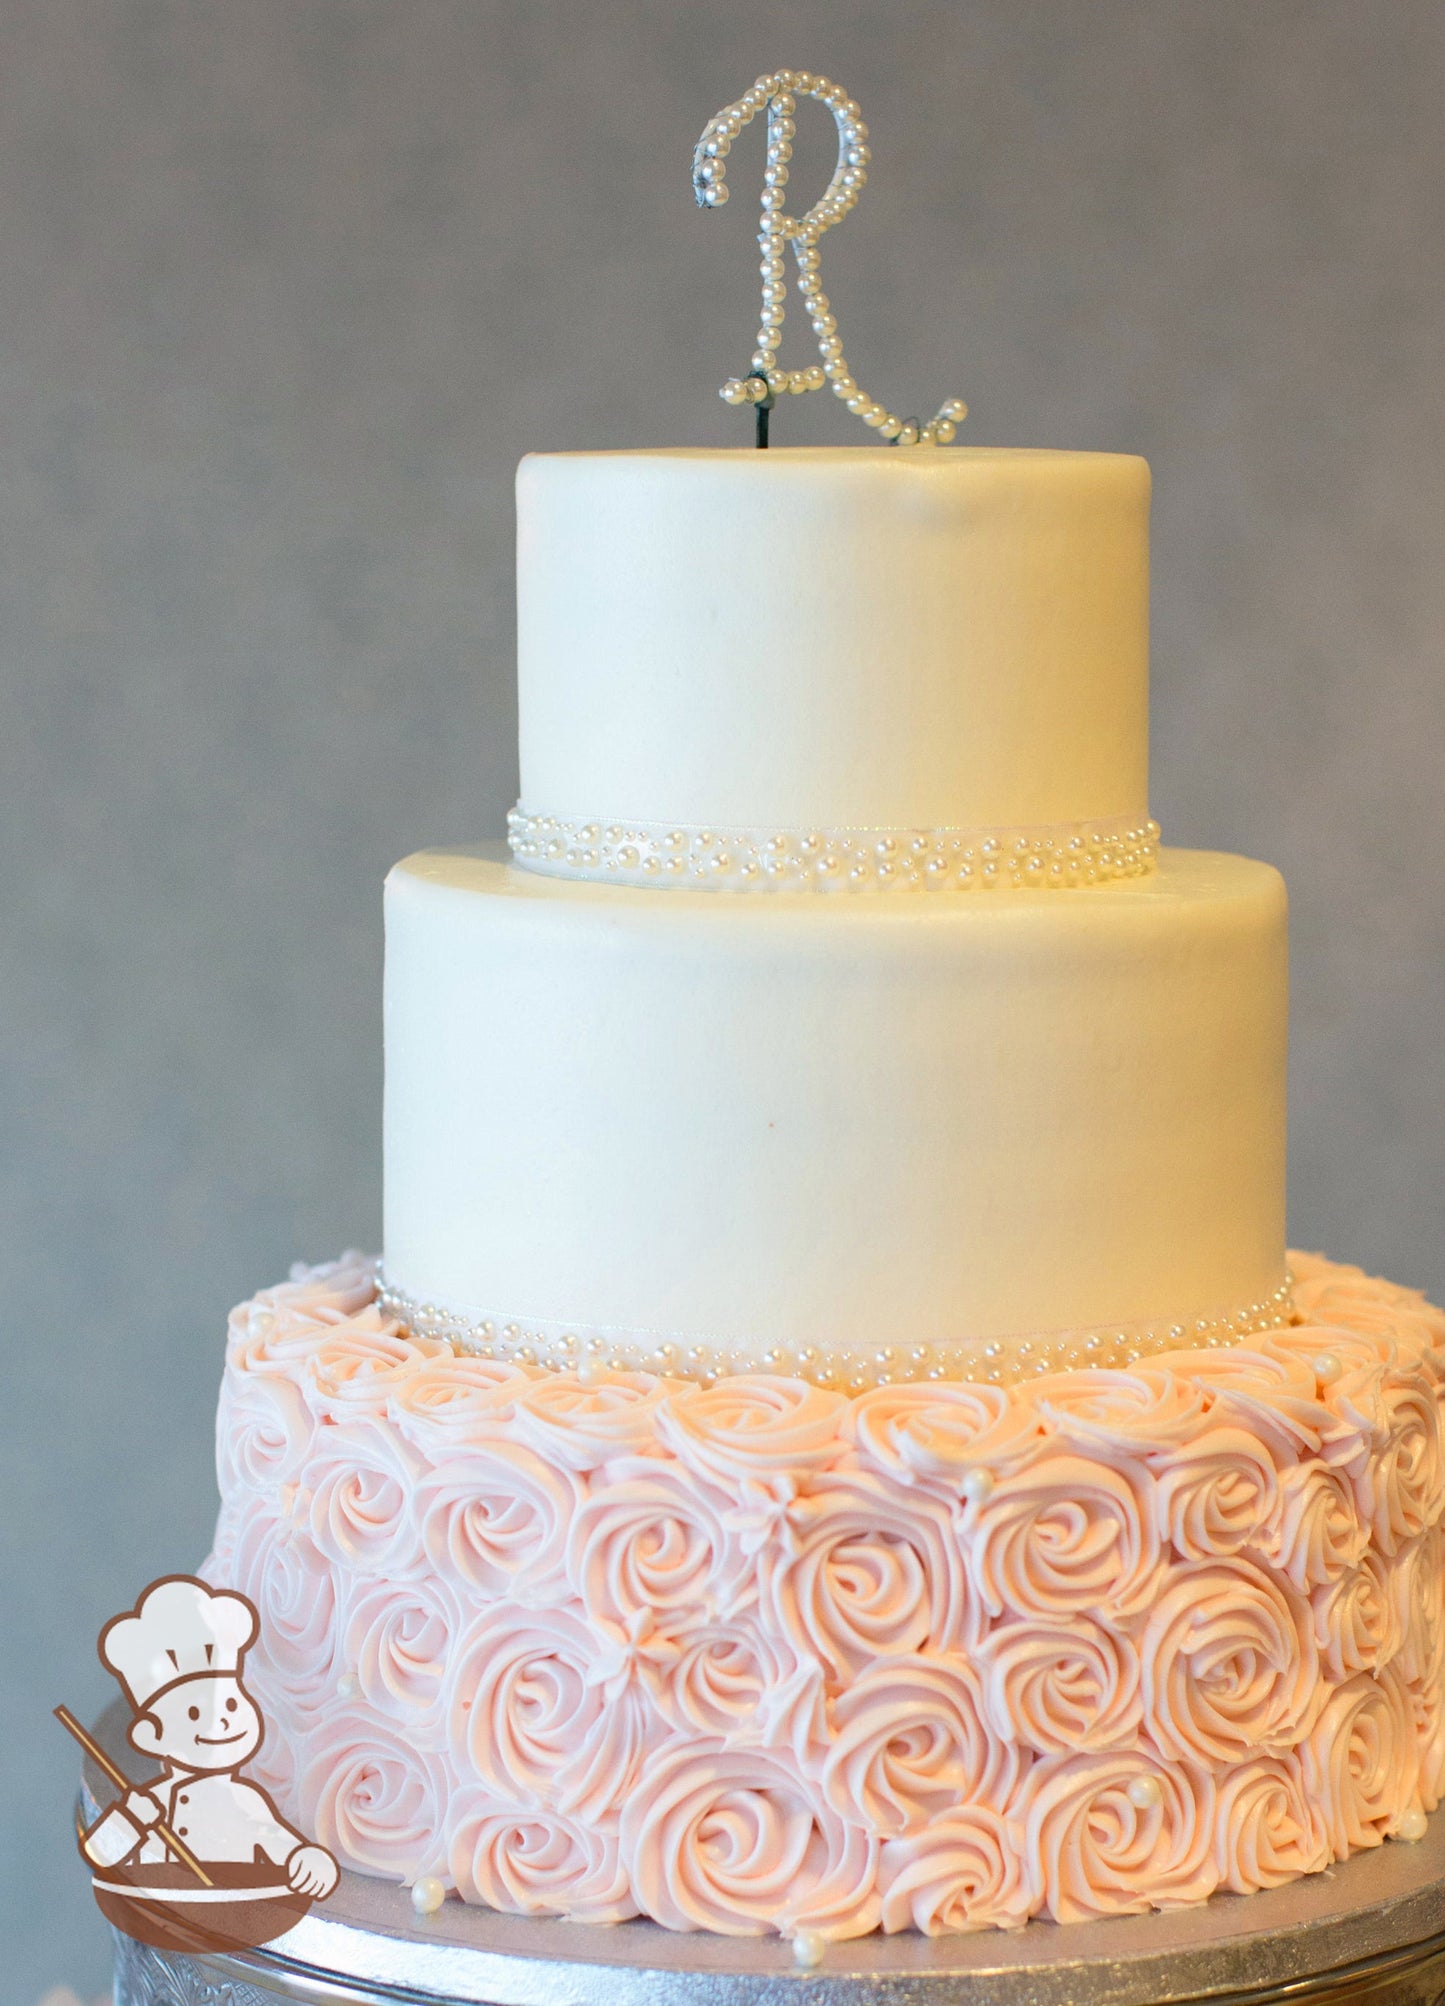 Light pink rosette swirls on bottom of a 3 tier round cake and smooth buttercream iced top tiers with white pearl bead band.